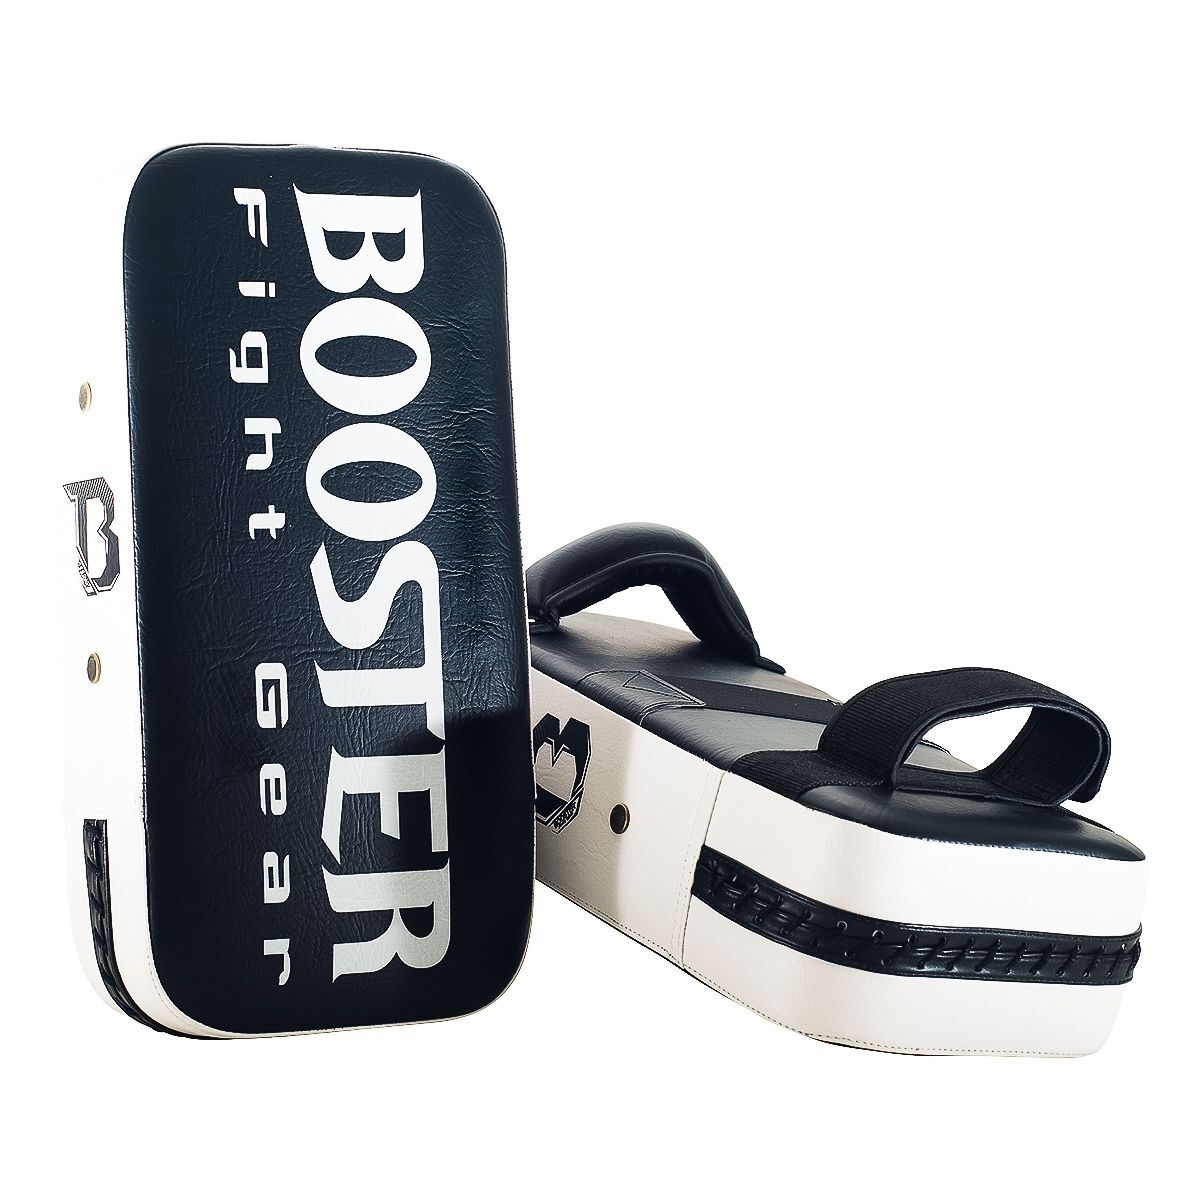 Paos Booster Fight Gear Budget Paos